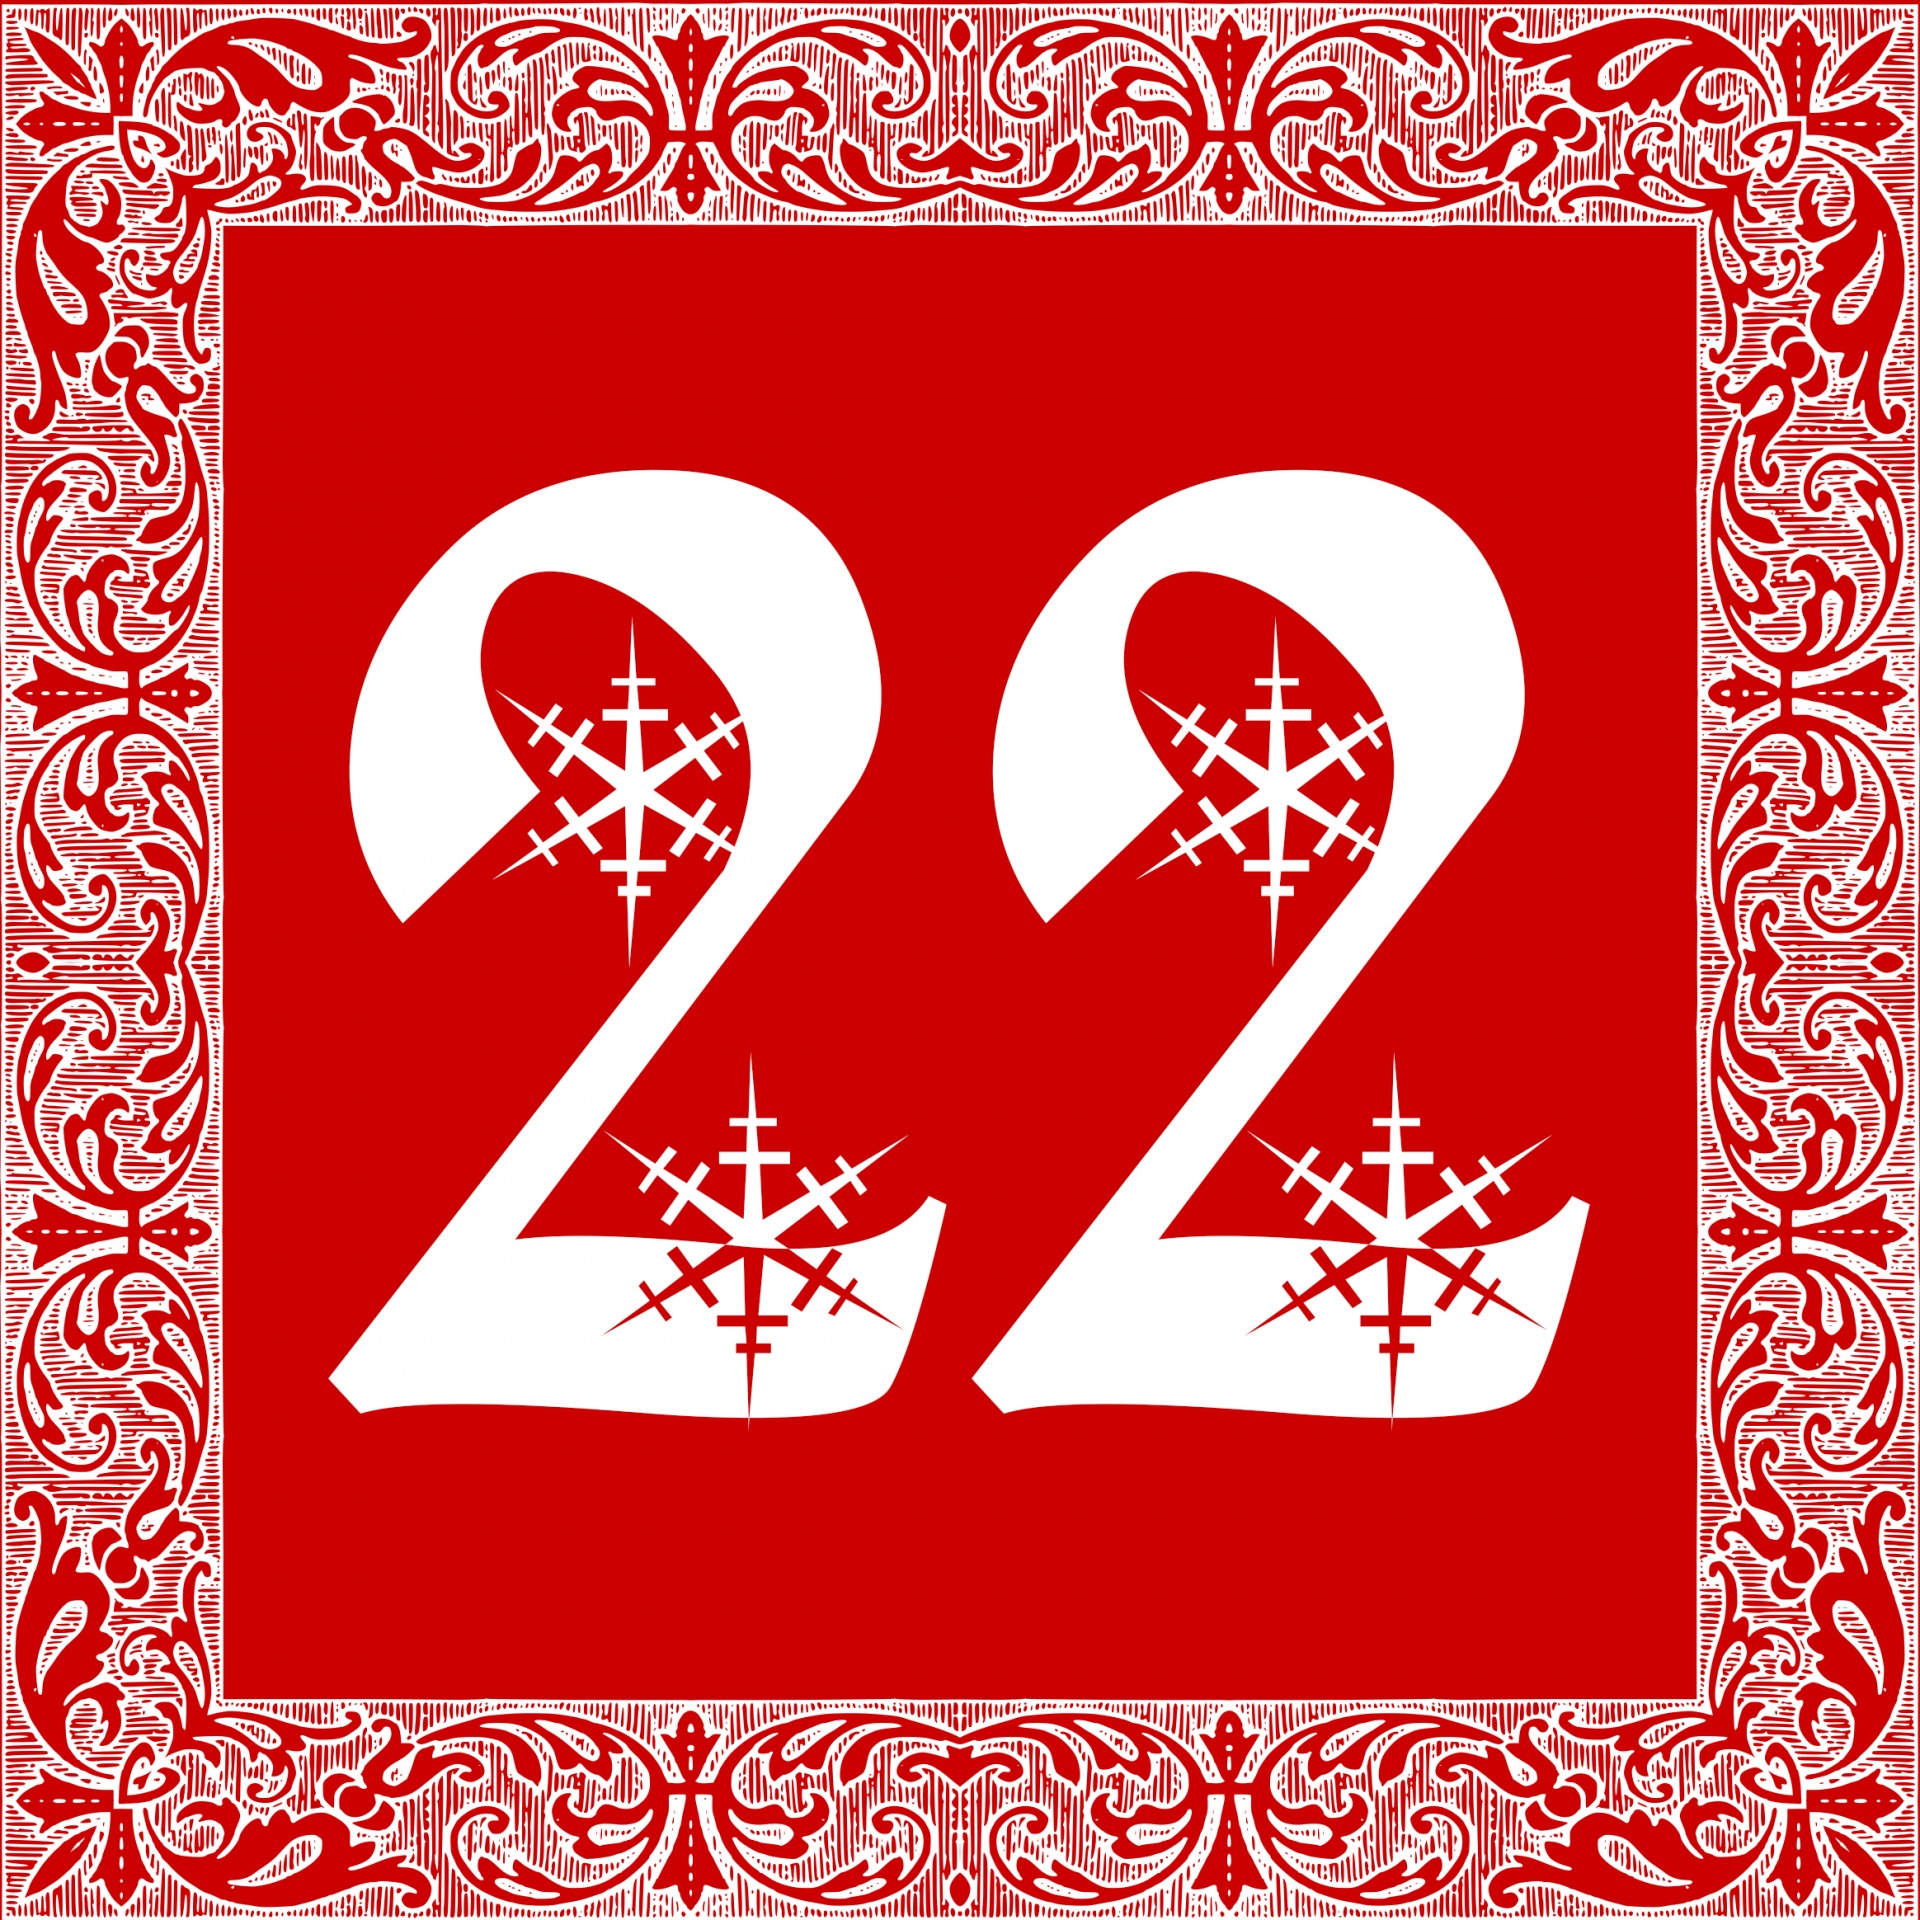 2 dimensional craft ready advent calendar for holiday countdown to Christmas. individual tiles